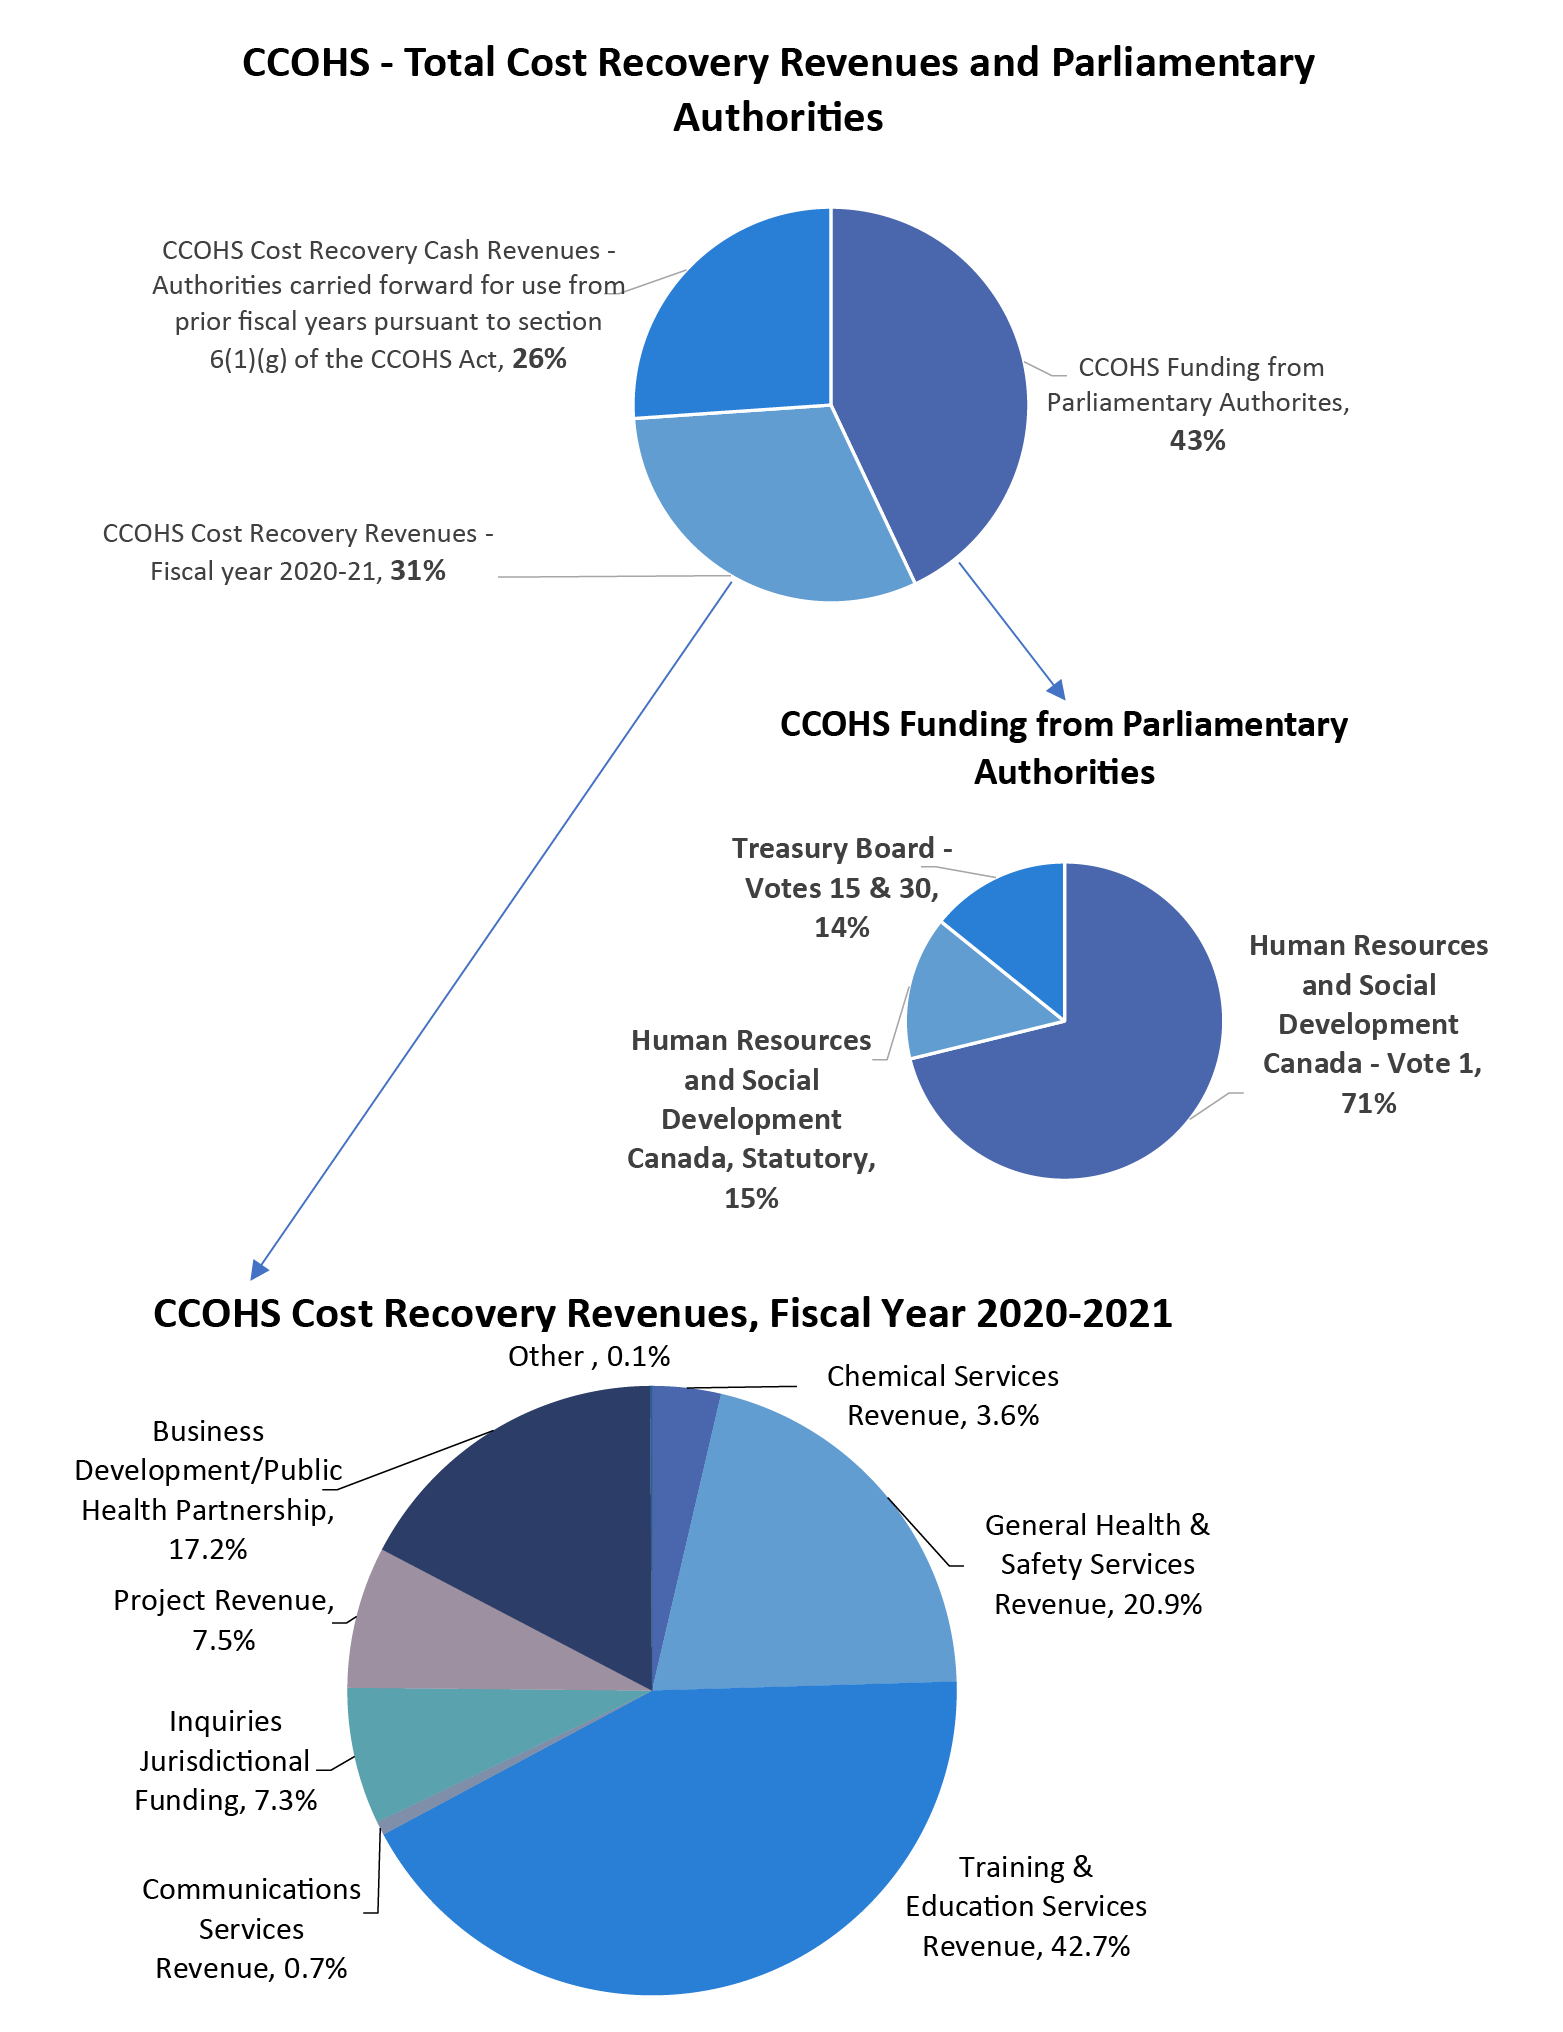 Graphs: CCOHS - Total Cost Recovery Revenues and Parliamentary Authorities, CCOHS Funding from Parliamentary Authorities, CCOHS Cost Recovery Revenues, Fiscal Year 2019-20